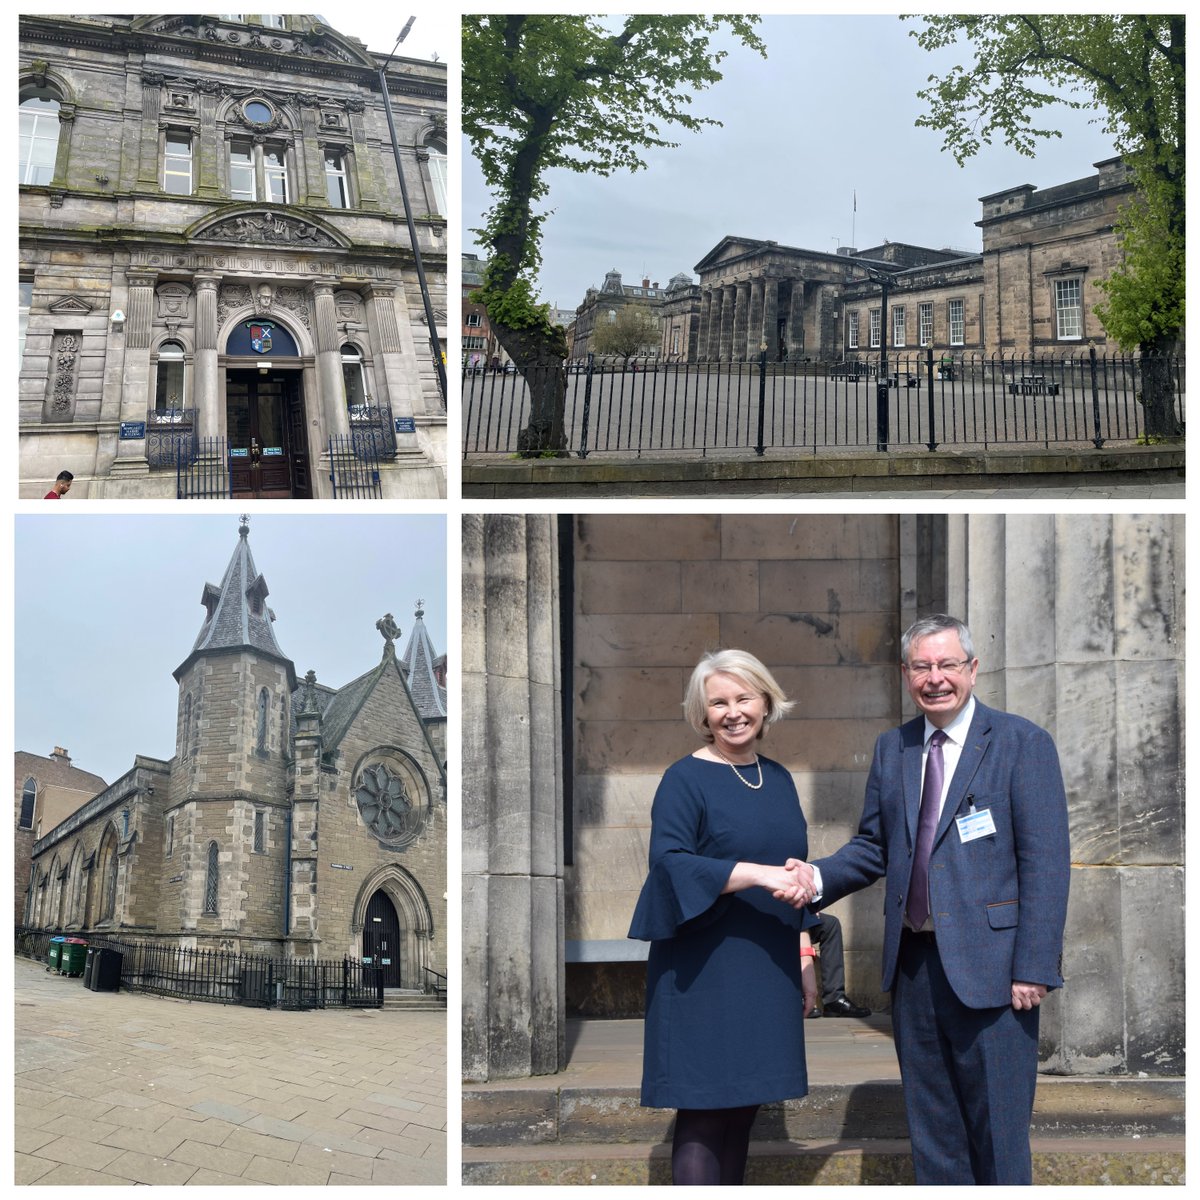 Sunshine blessed @HMC_Org General Secretary’s visit to High School of Dundee @HSofDundee to celebrate 50 years of HMC membership. Lise Hudson the Rector was remarkably generous with her time & Dr Hyde was grateful to meet so many staff, including the inspirational Head of History